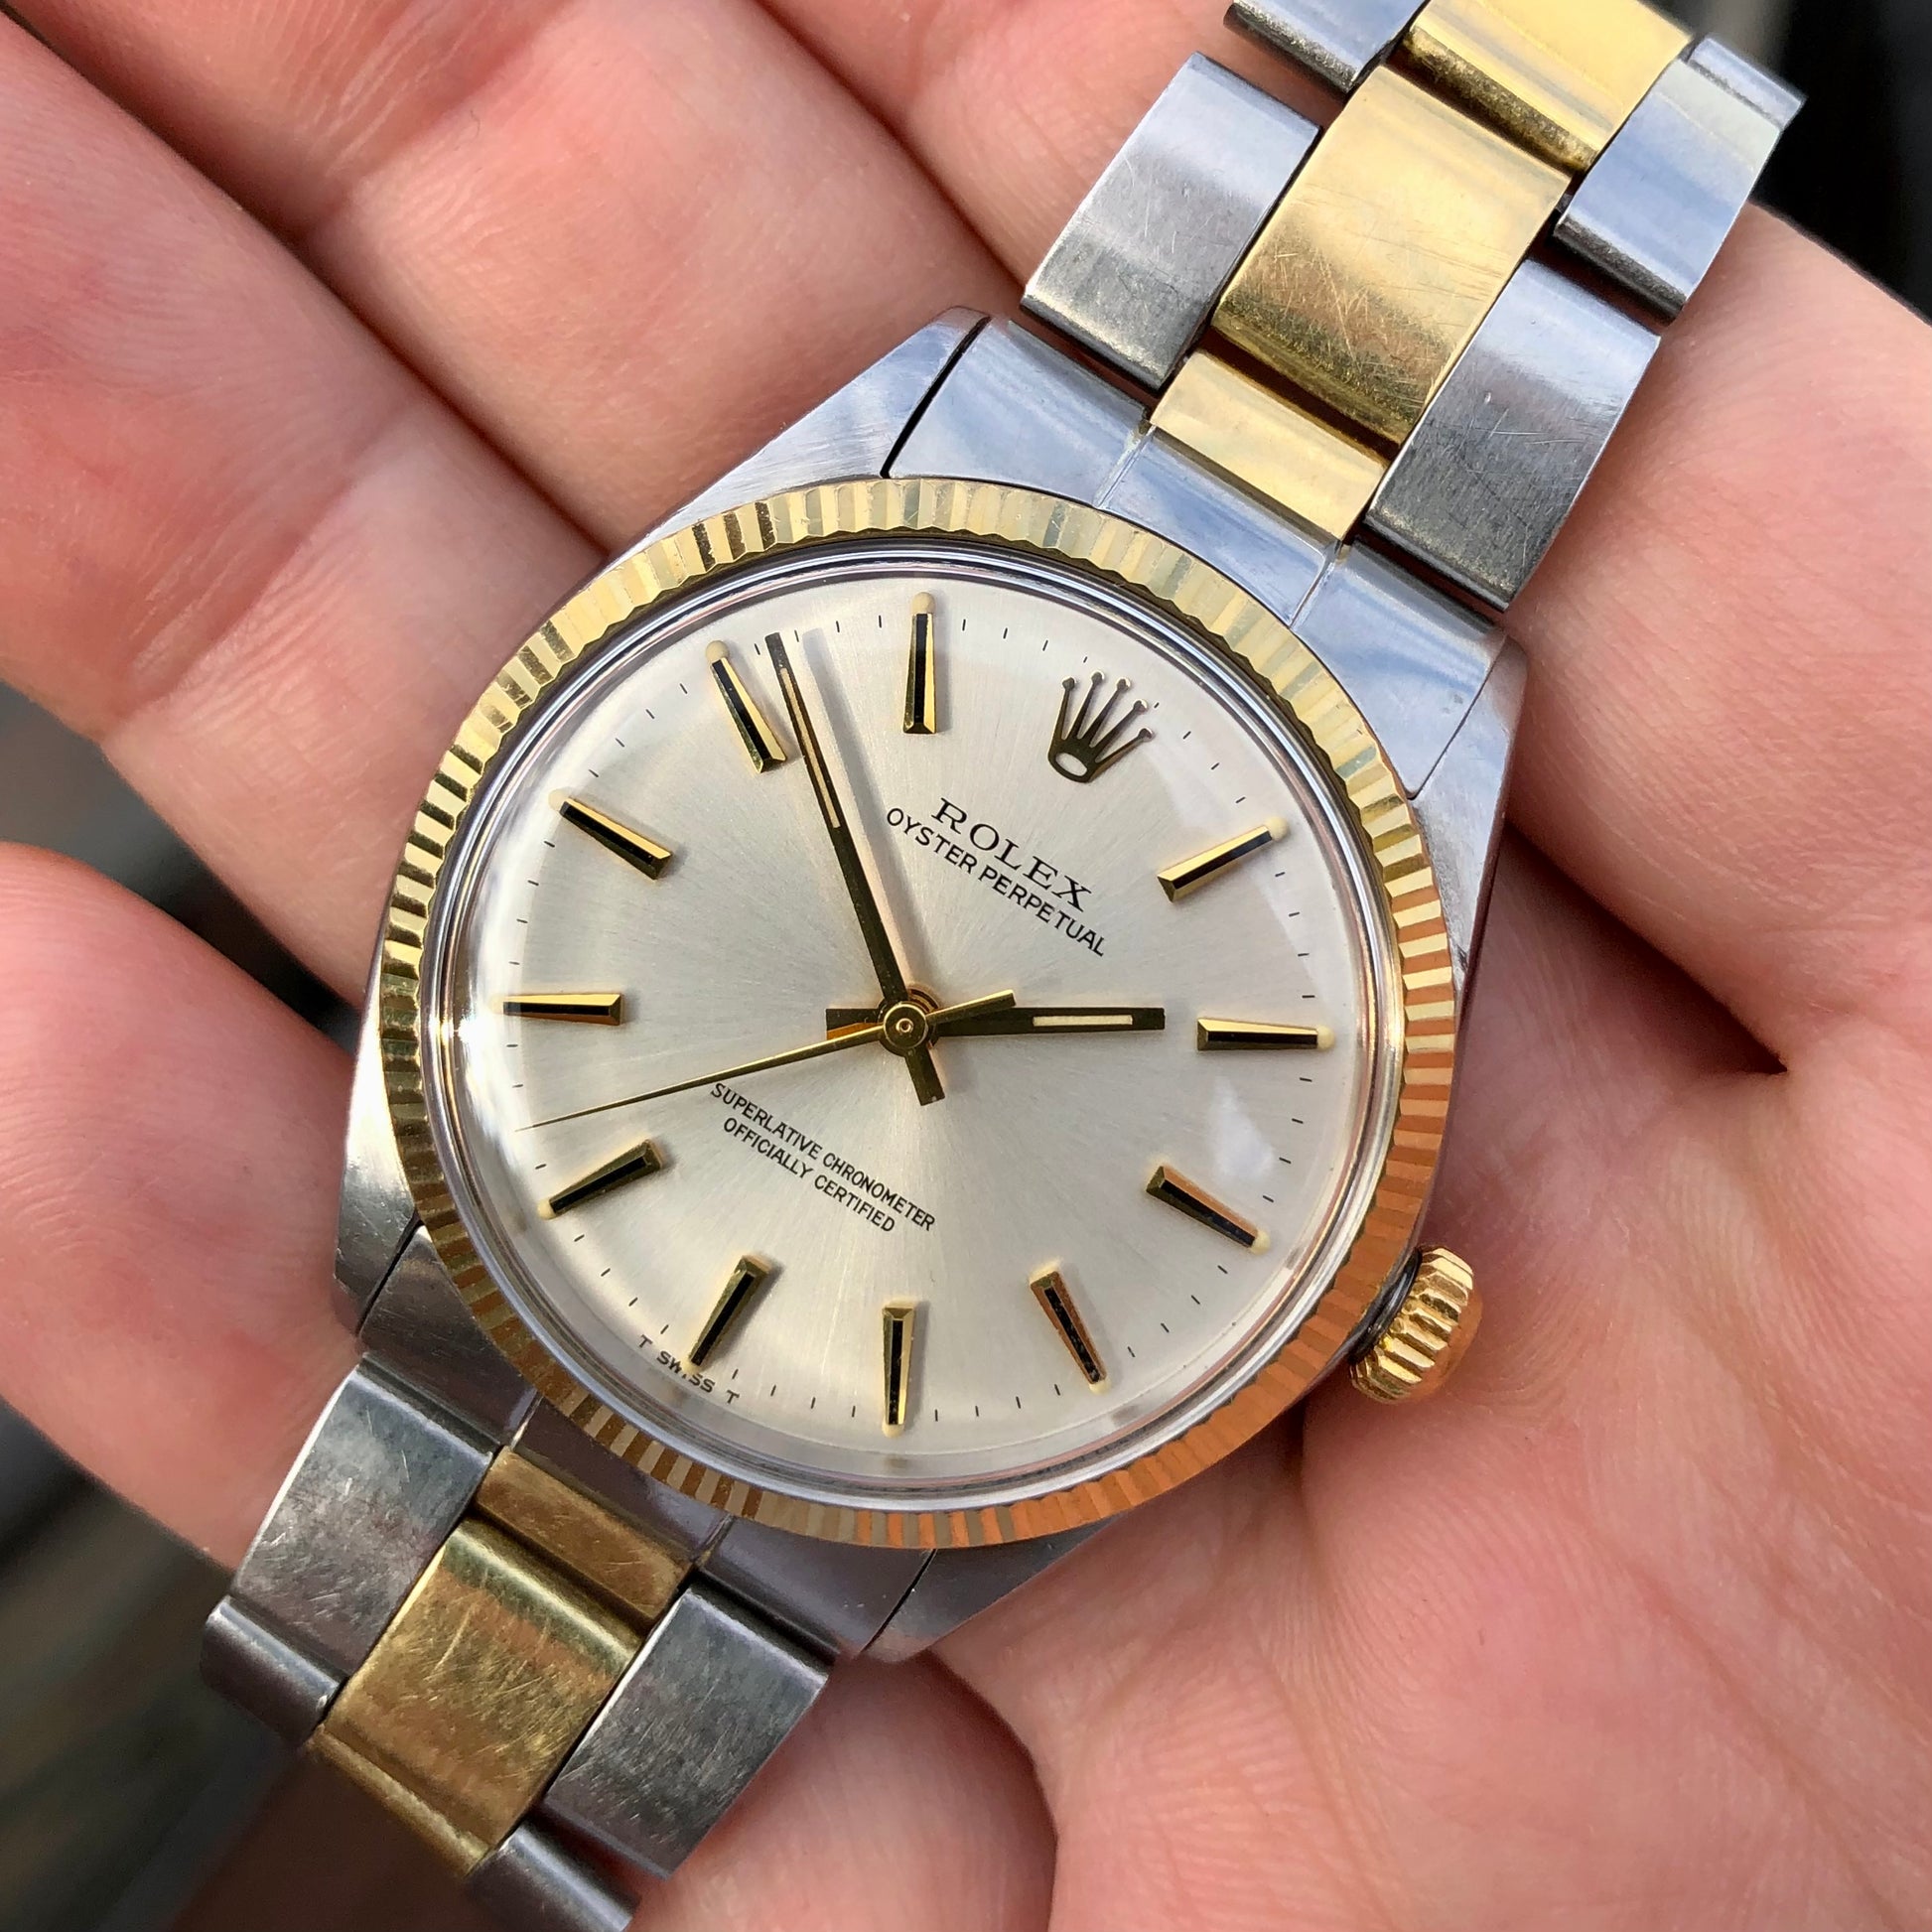 1970 Rolex Oyster Perpetual 1005 Two Tone Automatic Wristwatch - Hashtag Watch Company